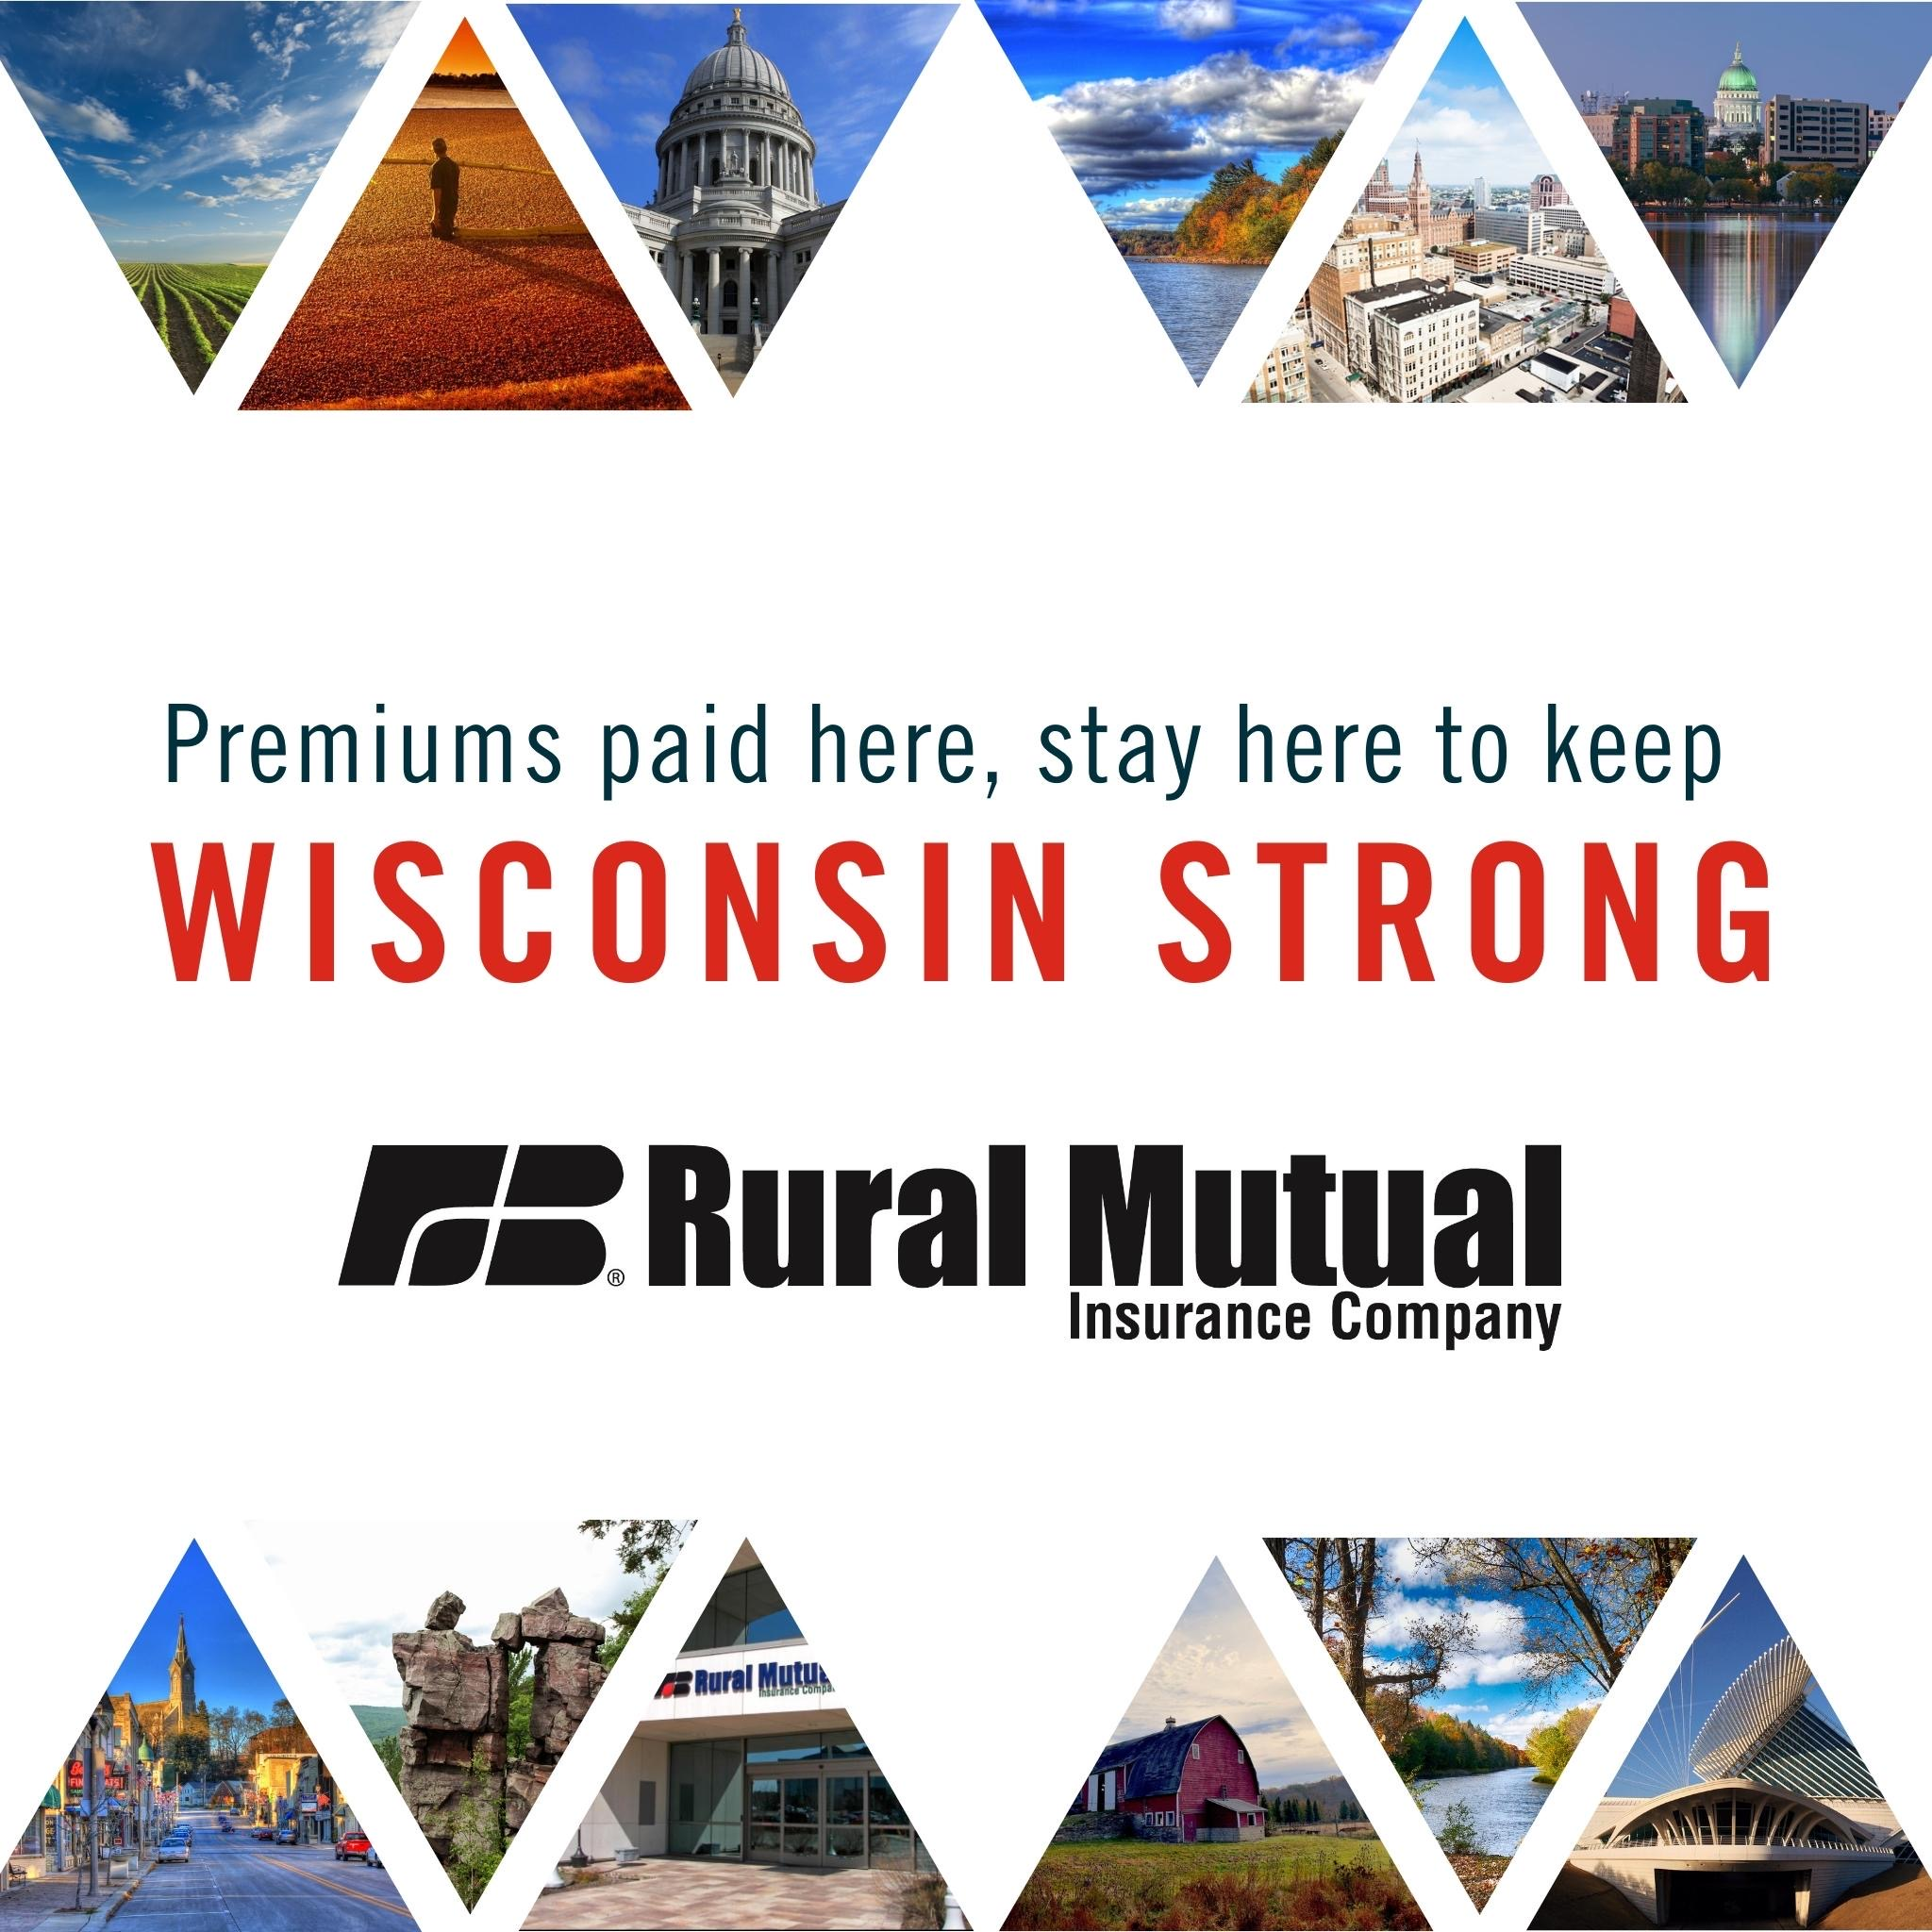 Rural Mutual Roundtable - Keep Family Safe When Operating Equipment